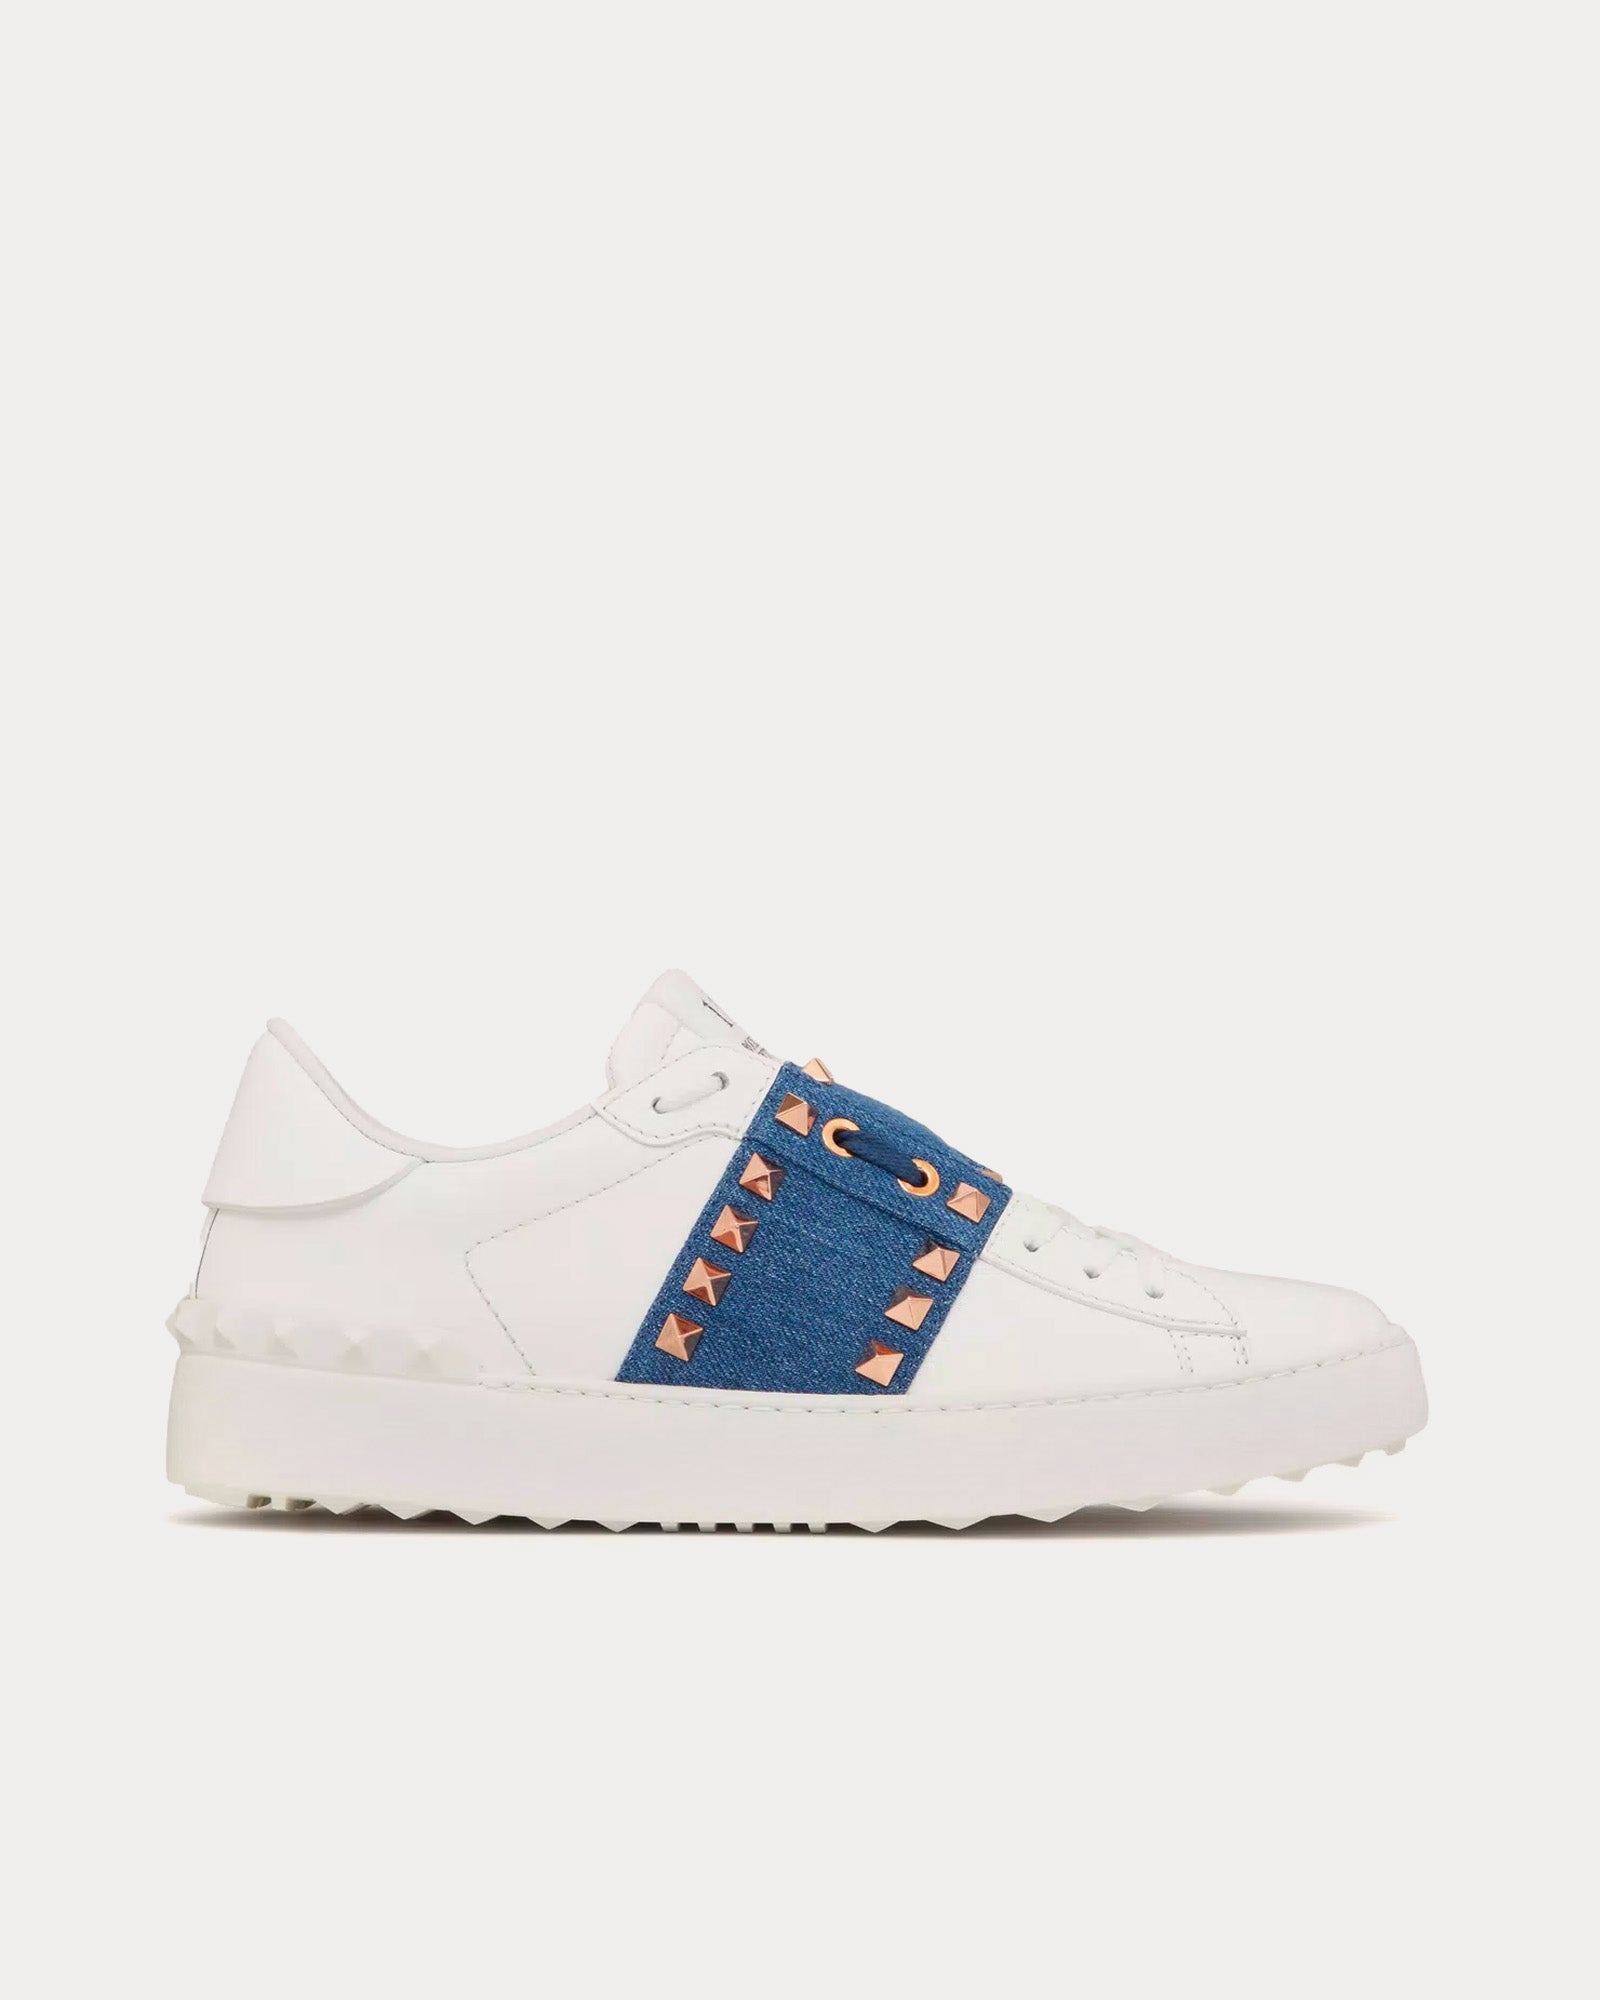 Valentino - Rockstud Untitled Calfskin with Denim Band White / Denim Low Top Sneakers